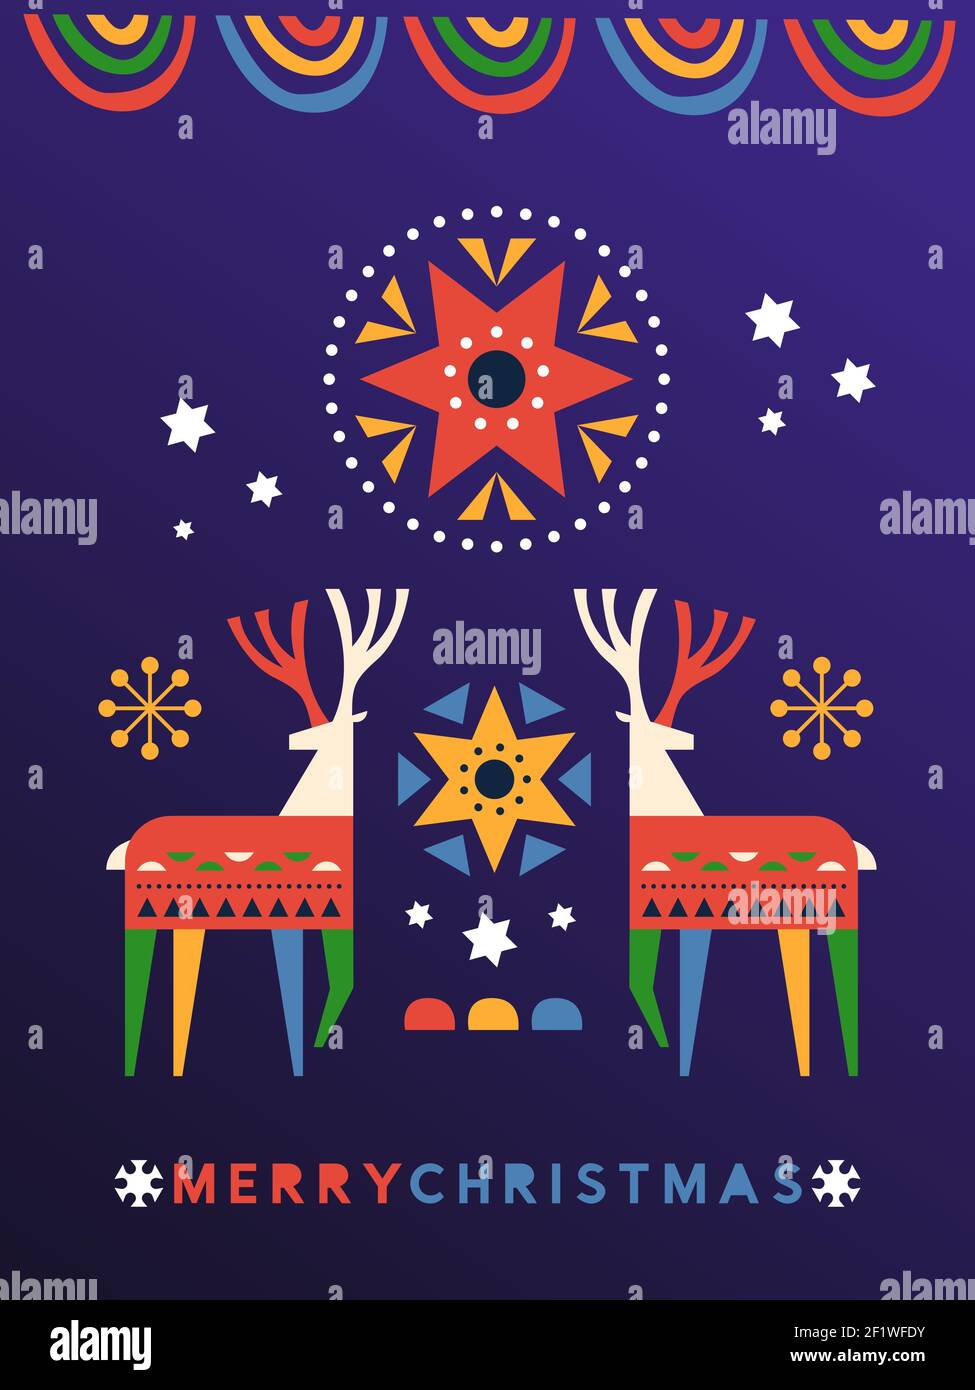 Merry Christmas folk art greeting card illustration. Colorful nordic style reindeer and traditional ornament decoration for december holiday event. Stock Vector